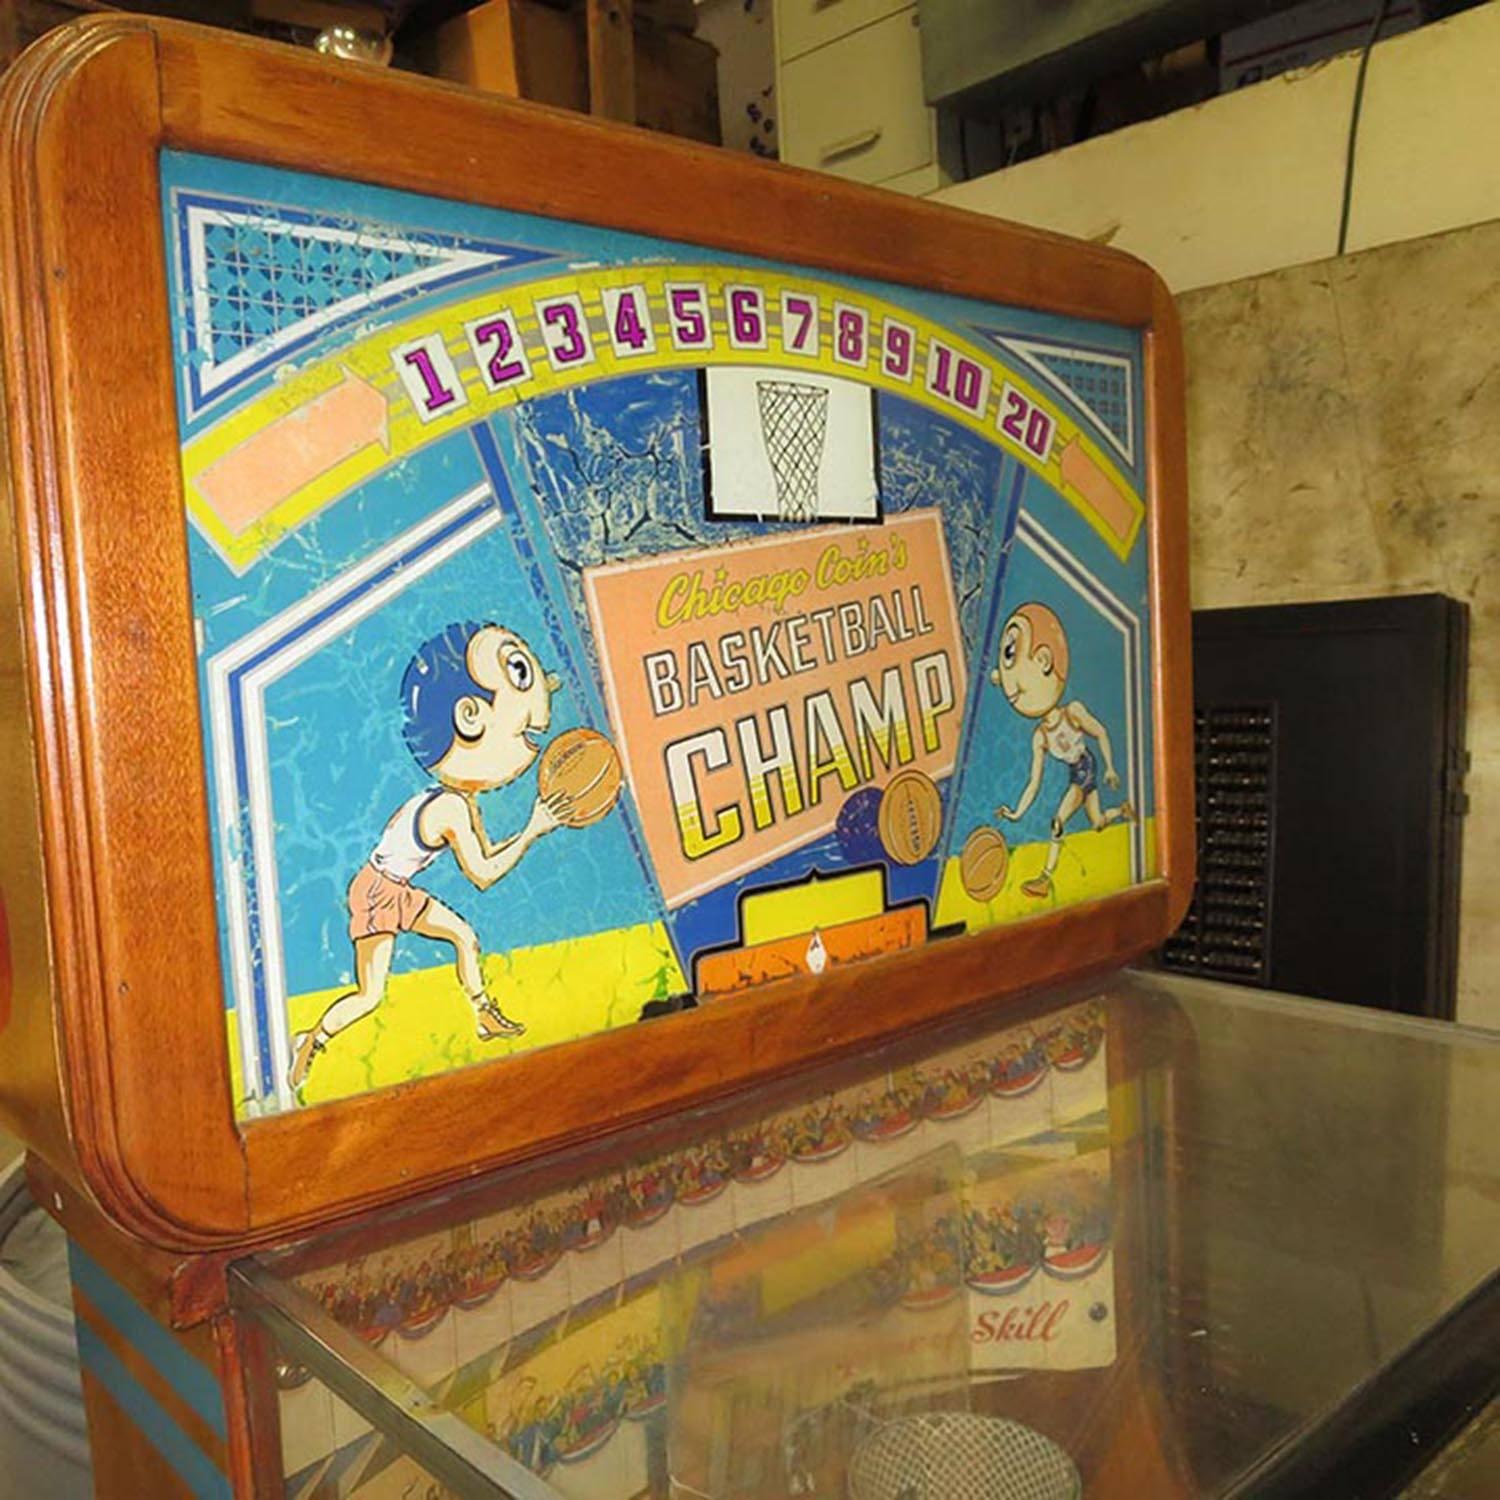 1947 Chicago Coins' Basketball Champ Arcade Game In Good Condition In North Hollywood, CA